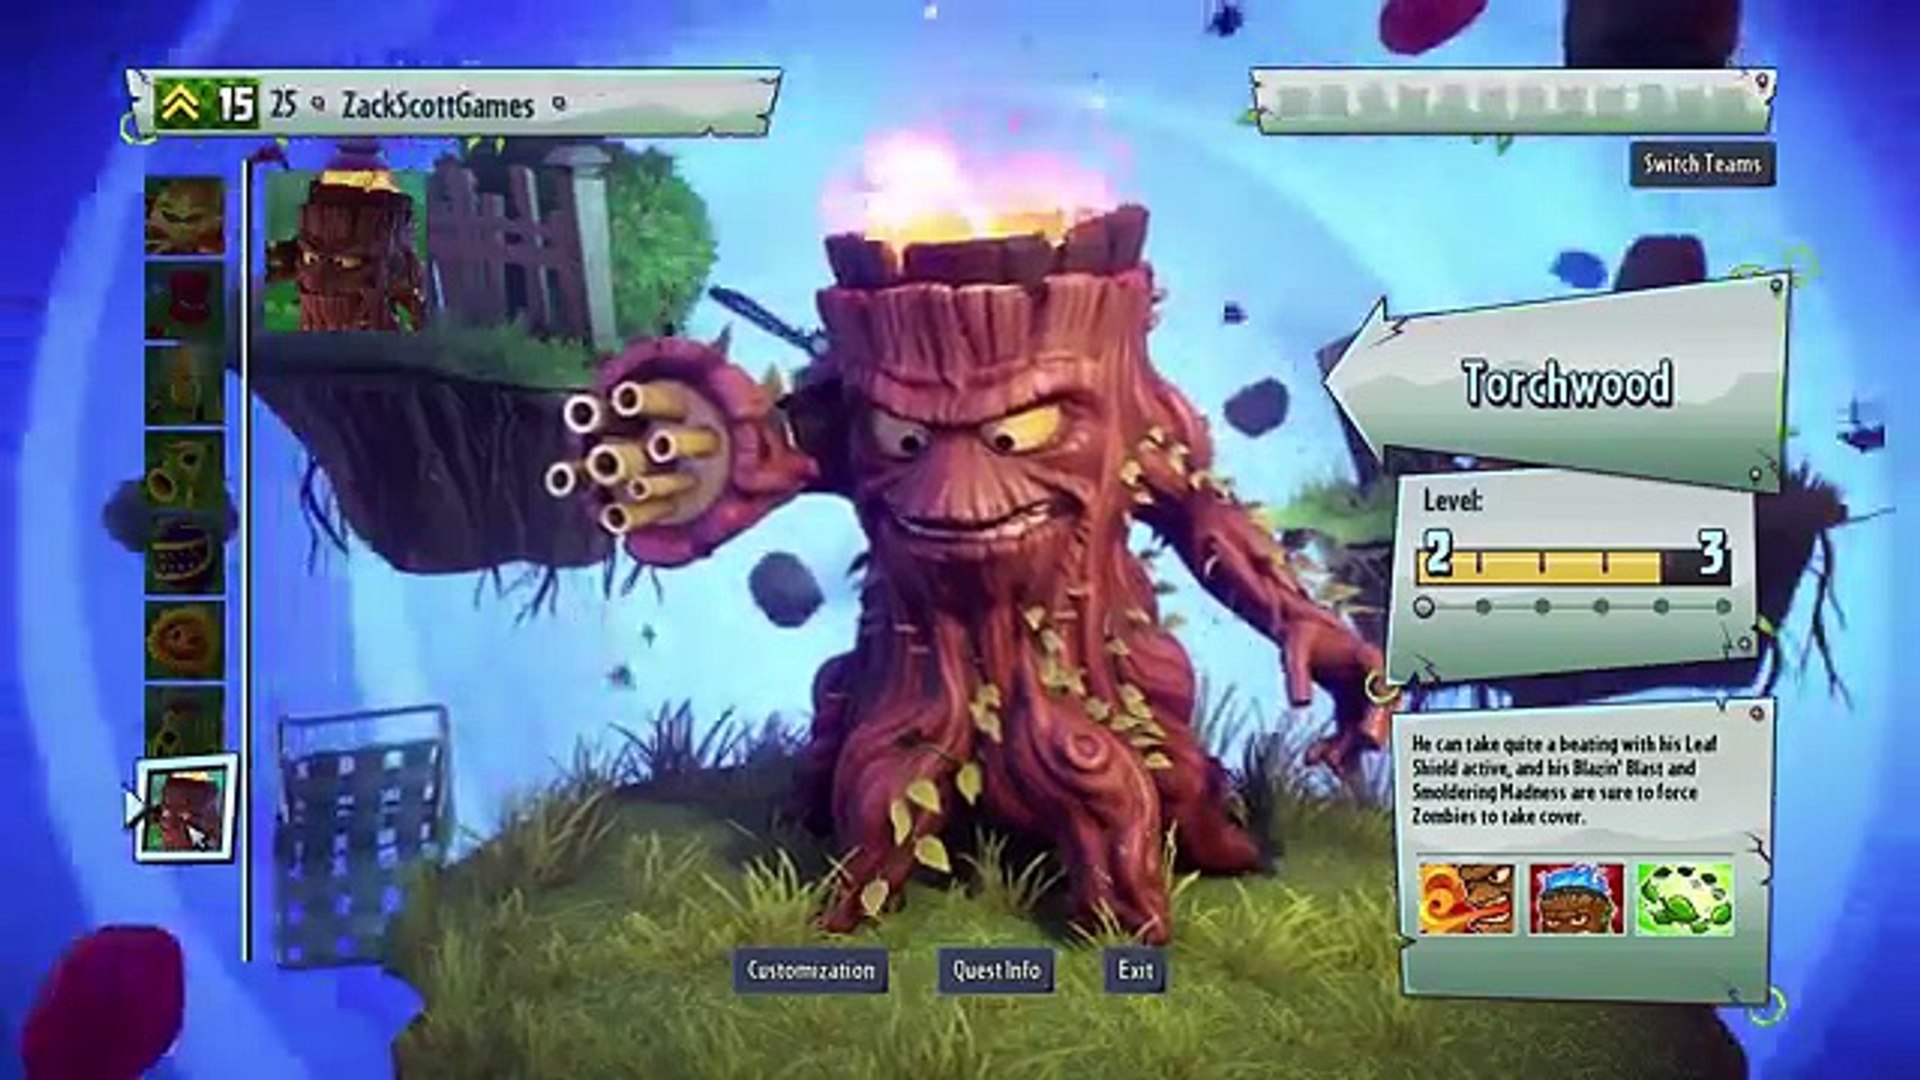 Plants vs Zombies GW2 released on steam. Like right now : r/PvZ